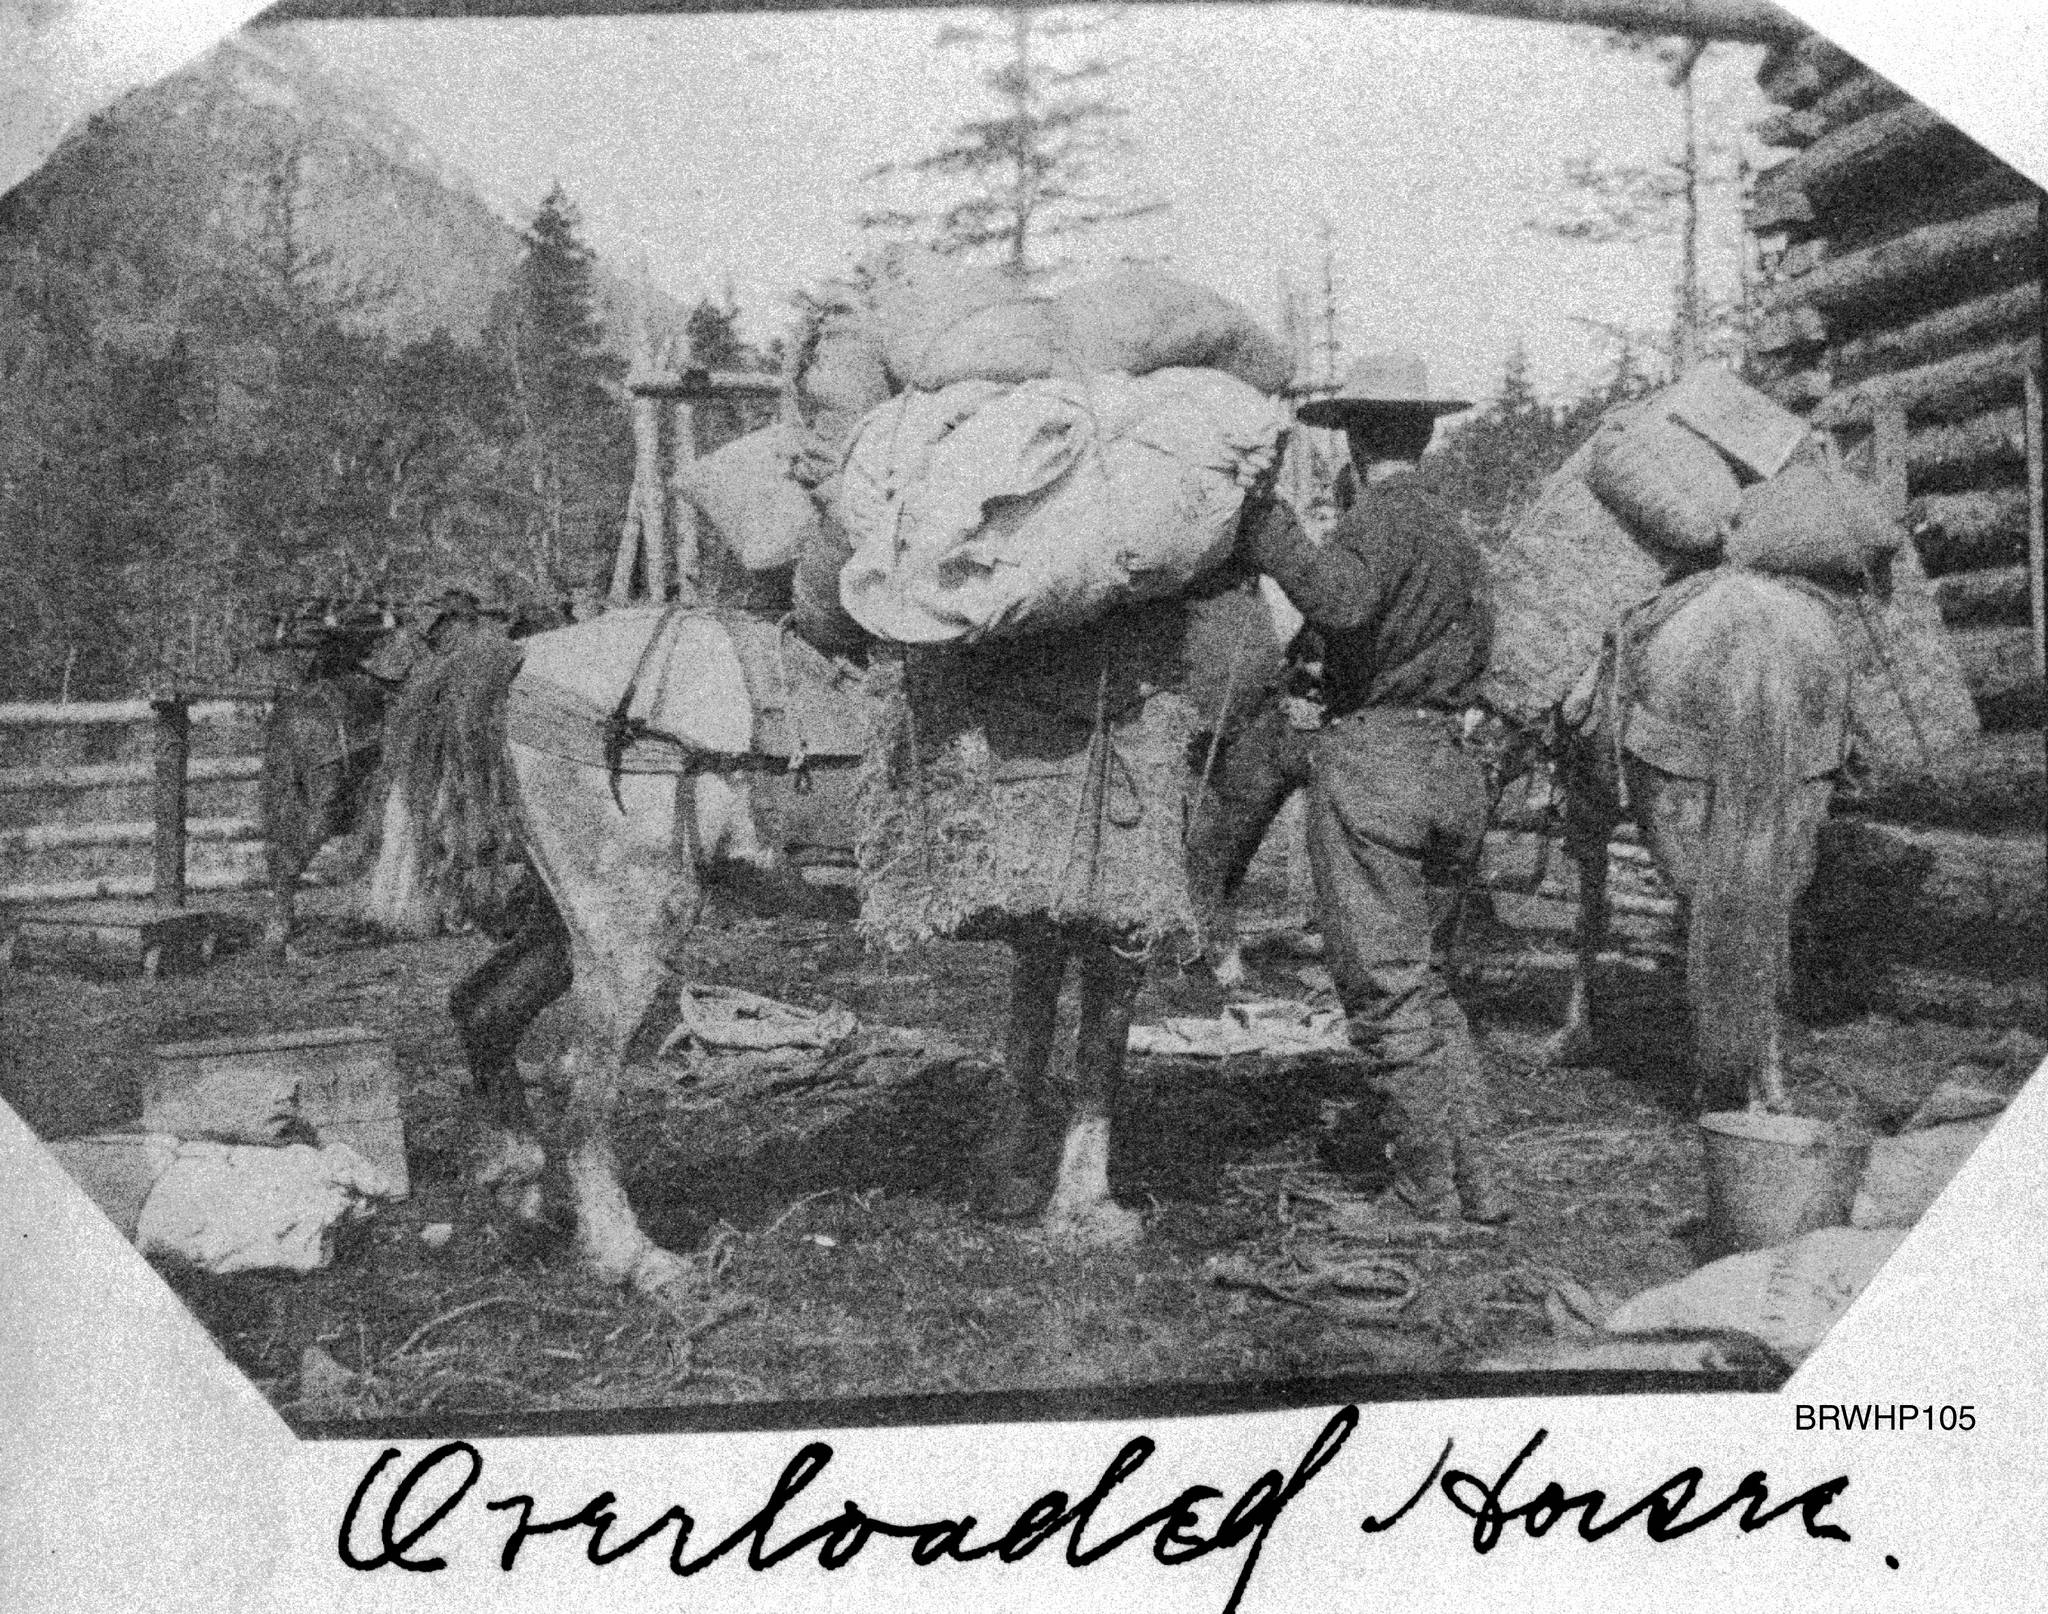 “Overloaded Horse,” looking north on the White Pass Trail, circa summer 1898. The building on the right is probably located around five miles outside Skagway based on the captions on other photographs of the same building. (Courtesy Photo | National Park Service, Klondike Gold Rush National Historical Park, Brackett Family Collection, BRWHP105, KLGO BW-73-5346)